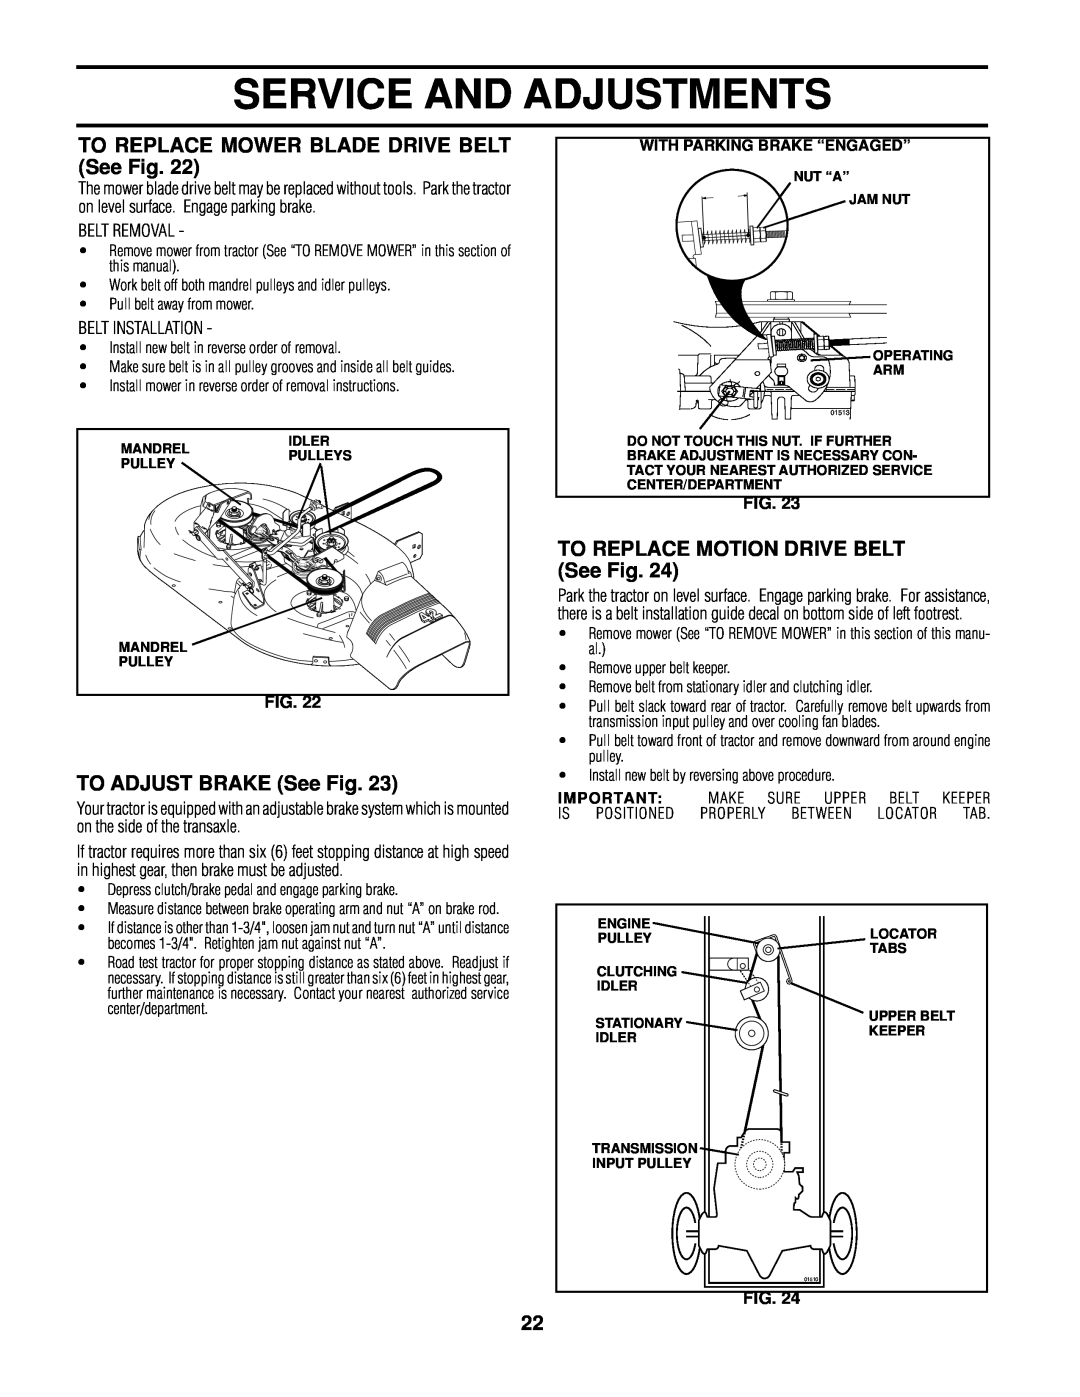 Poulan 161608 owner manual Service And Adjustments, TO REPLACE MOWER BLADE DRIVE BELT See Fig, TO ADJUST BRAKE See Fig 